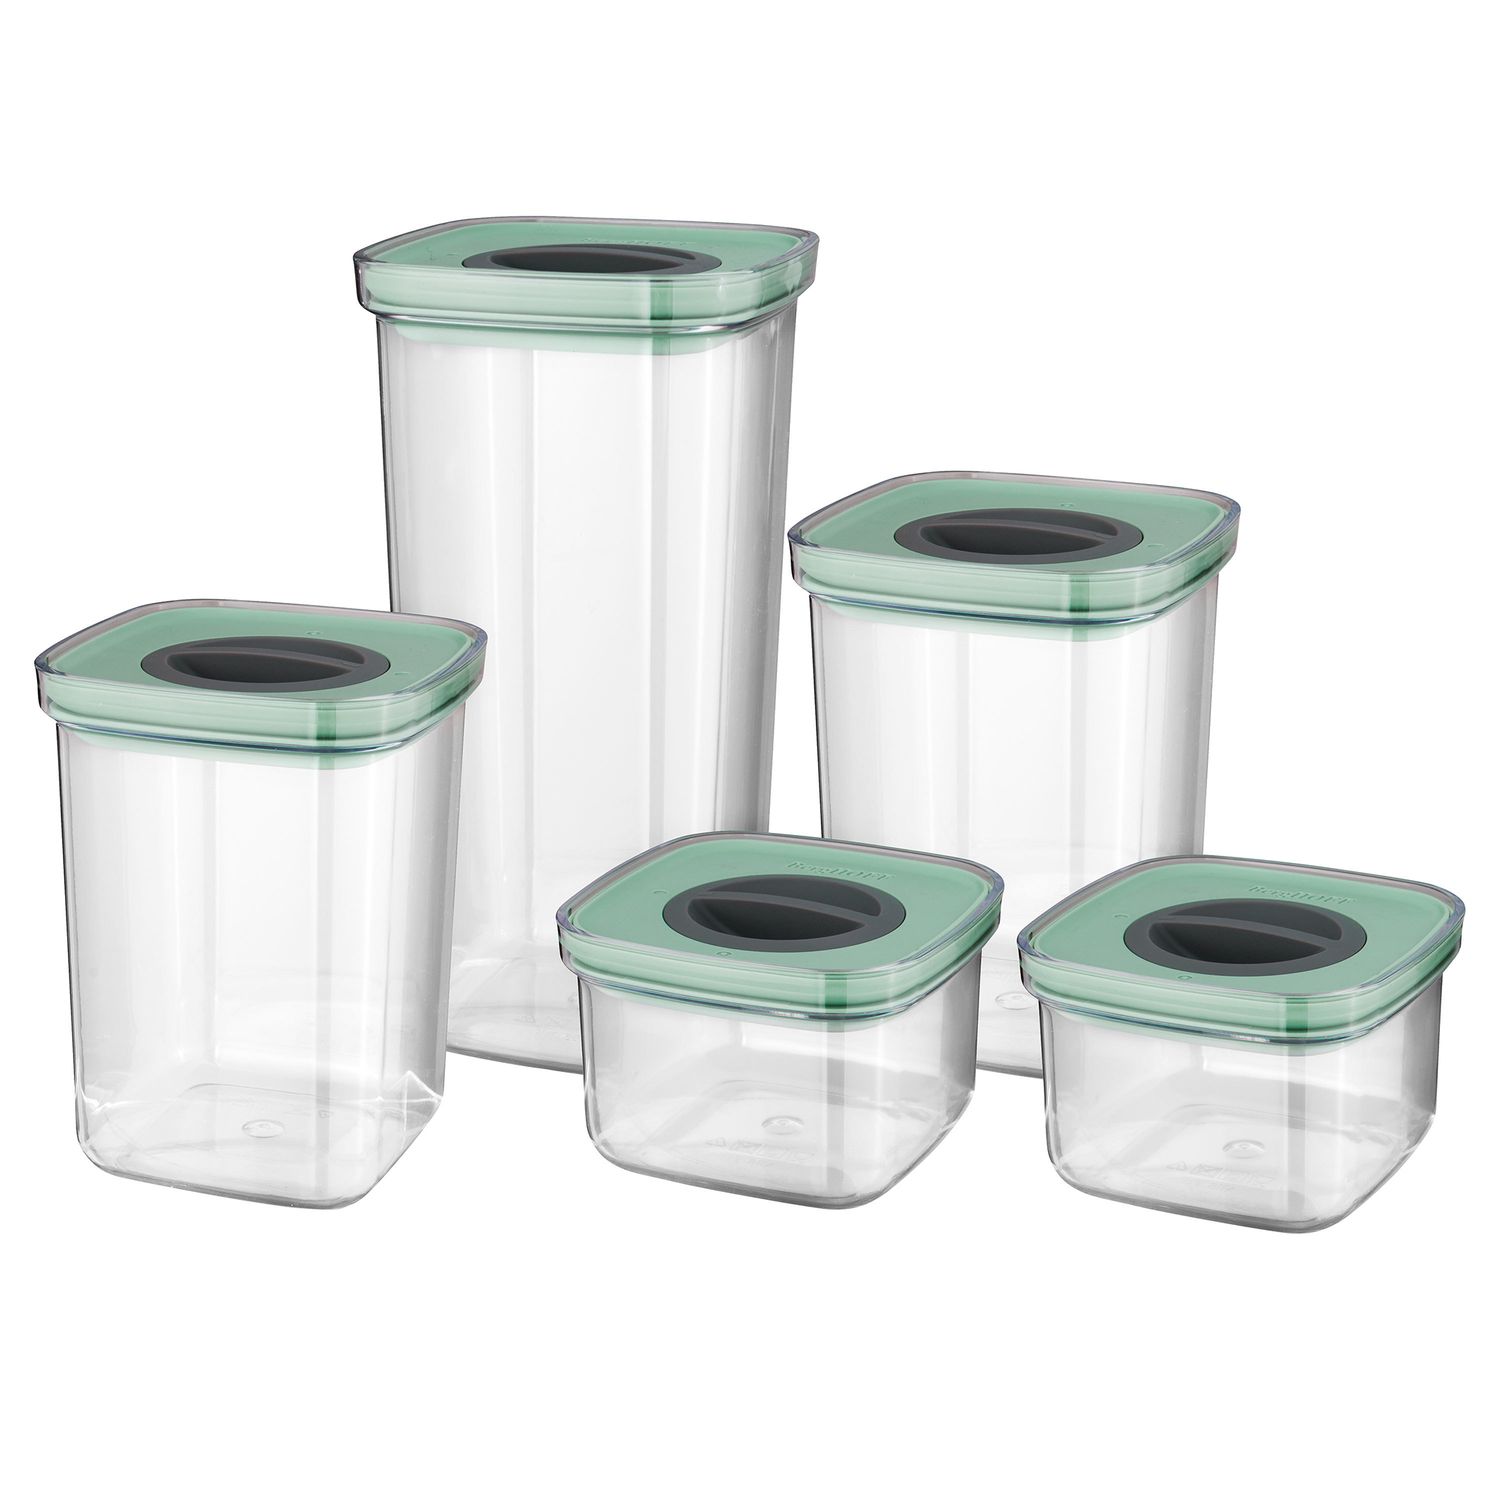 Sterilite 03221106 8.3 Cup Rectangle Ultra-Seal Food Container, Orange (6  Pack)